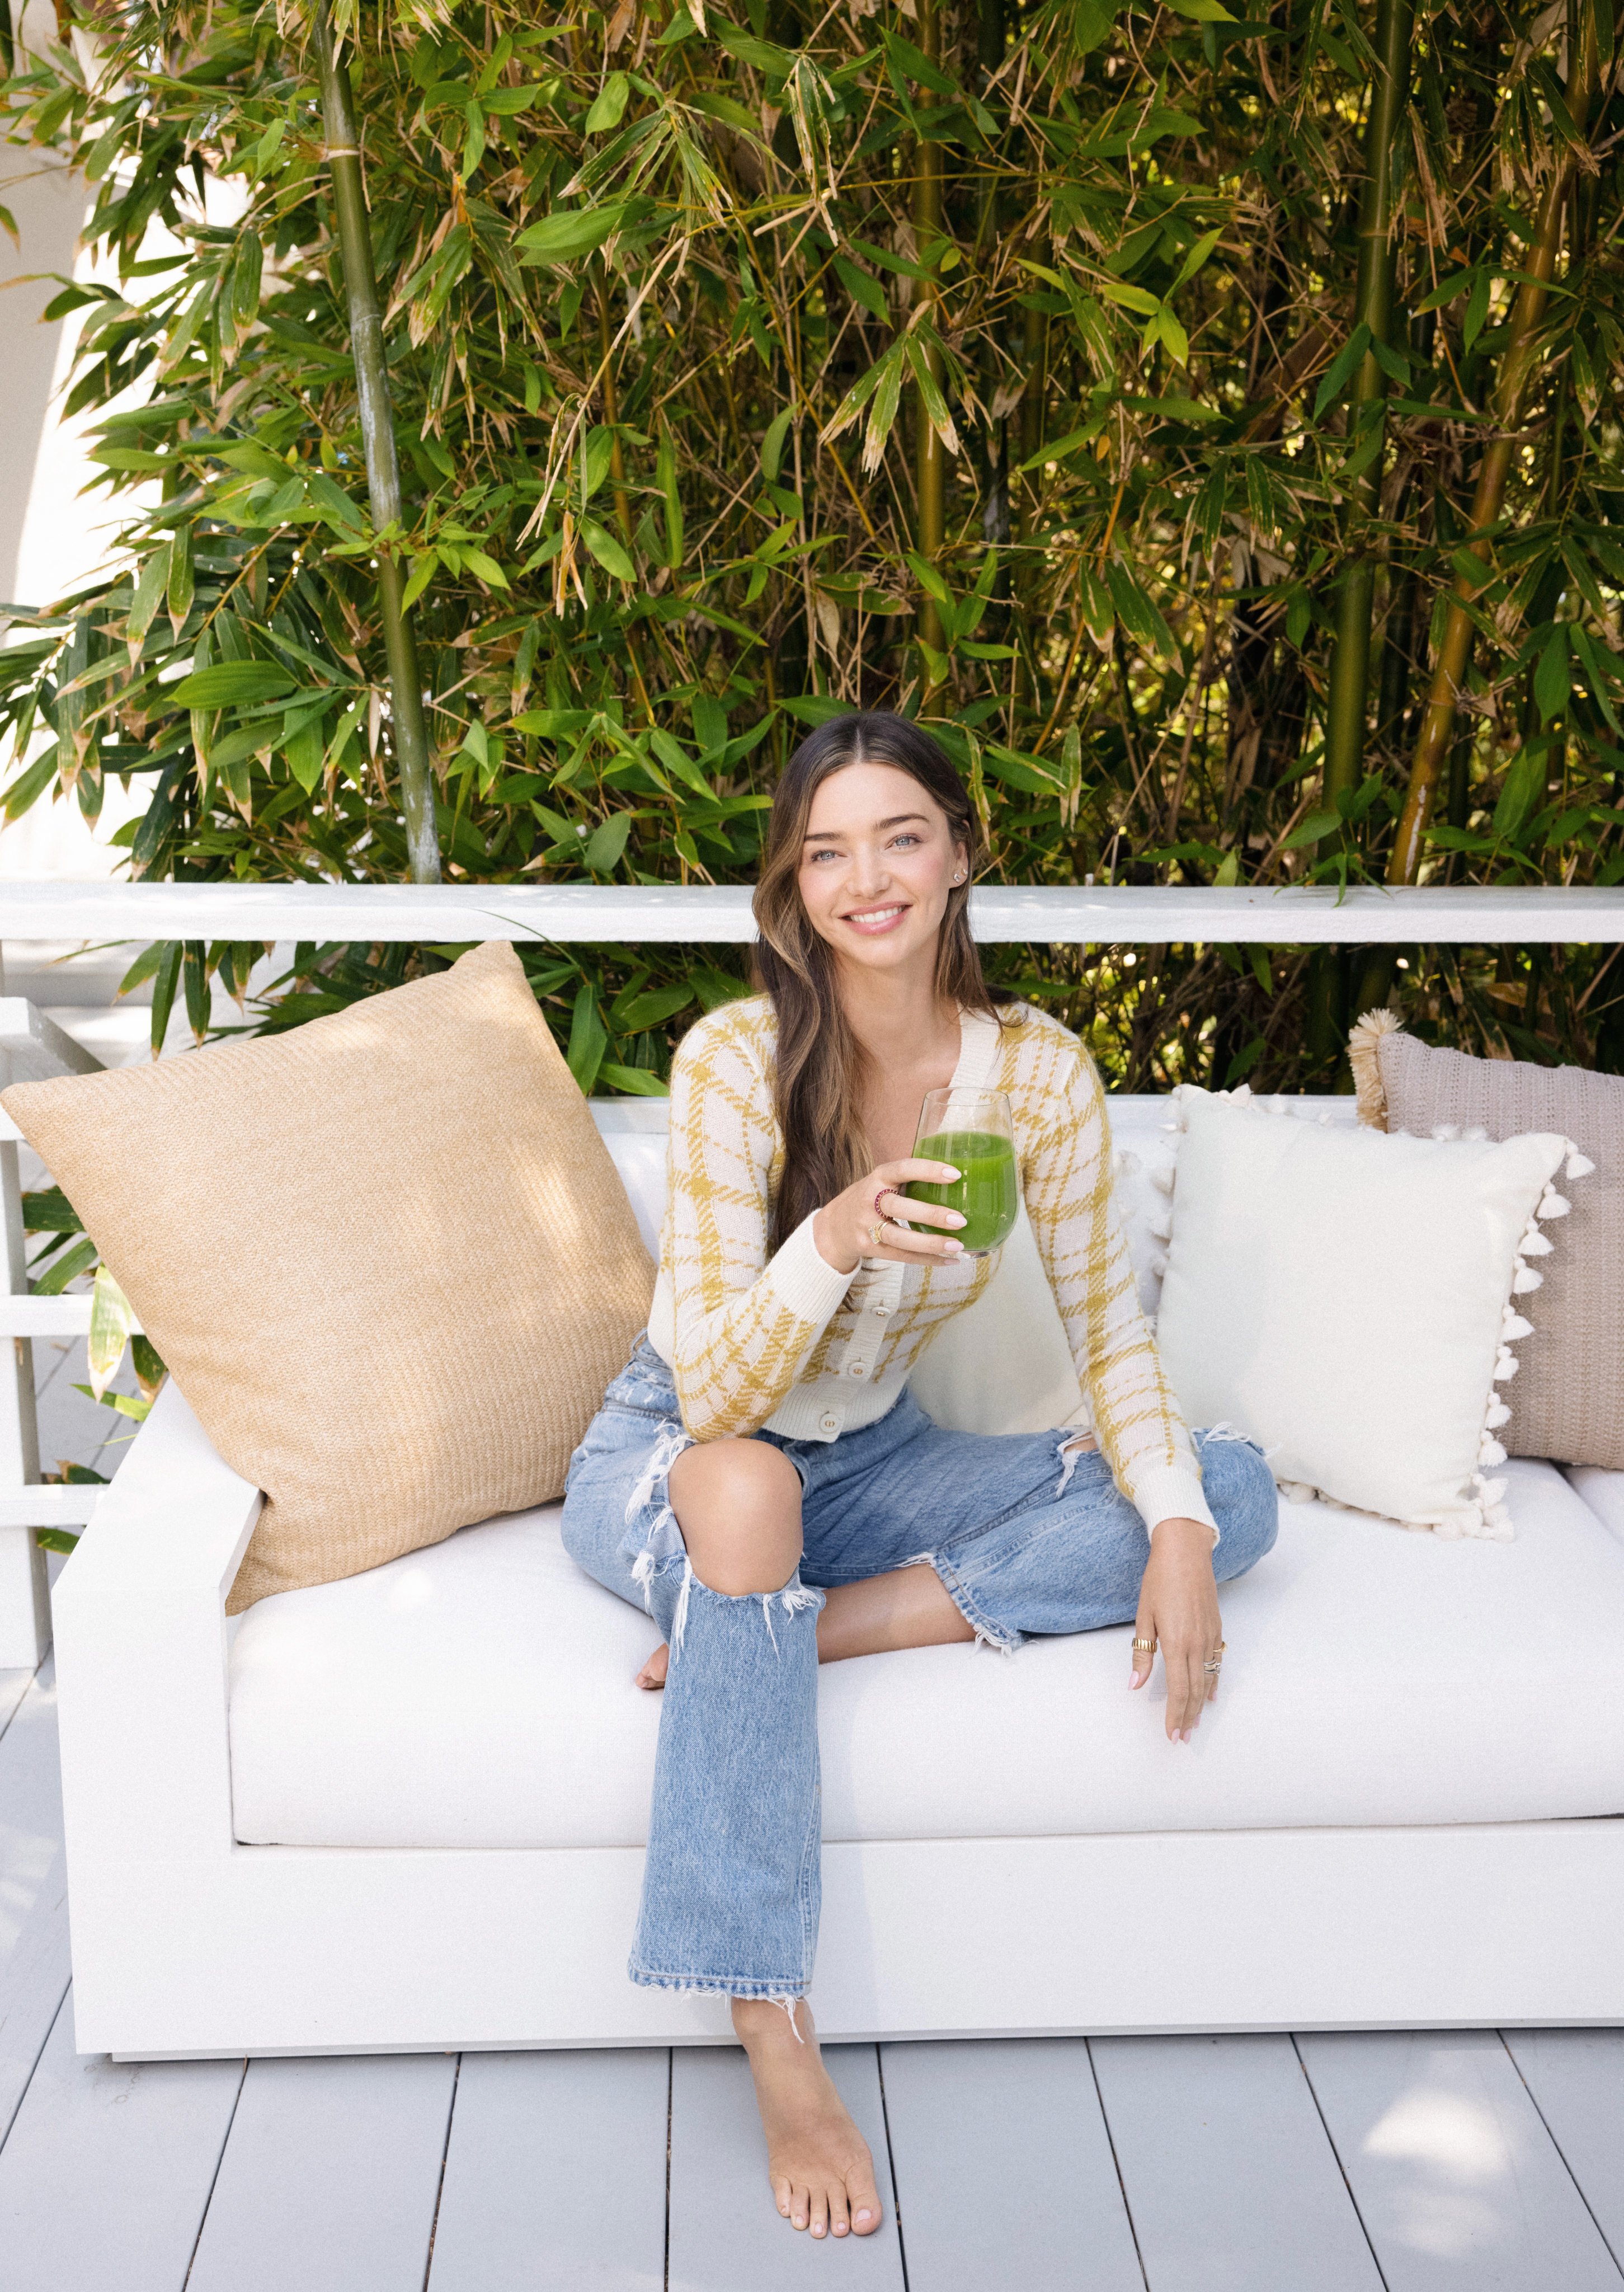 9 lifestyle tips from model and entrepreneur Miranda Kerr, the Australian former Victoria’s Secret Angel who owns Kora Organics and is married to Snapchat co-founder Evan Spiegel. Photo: Handout